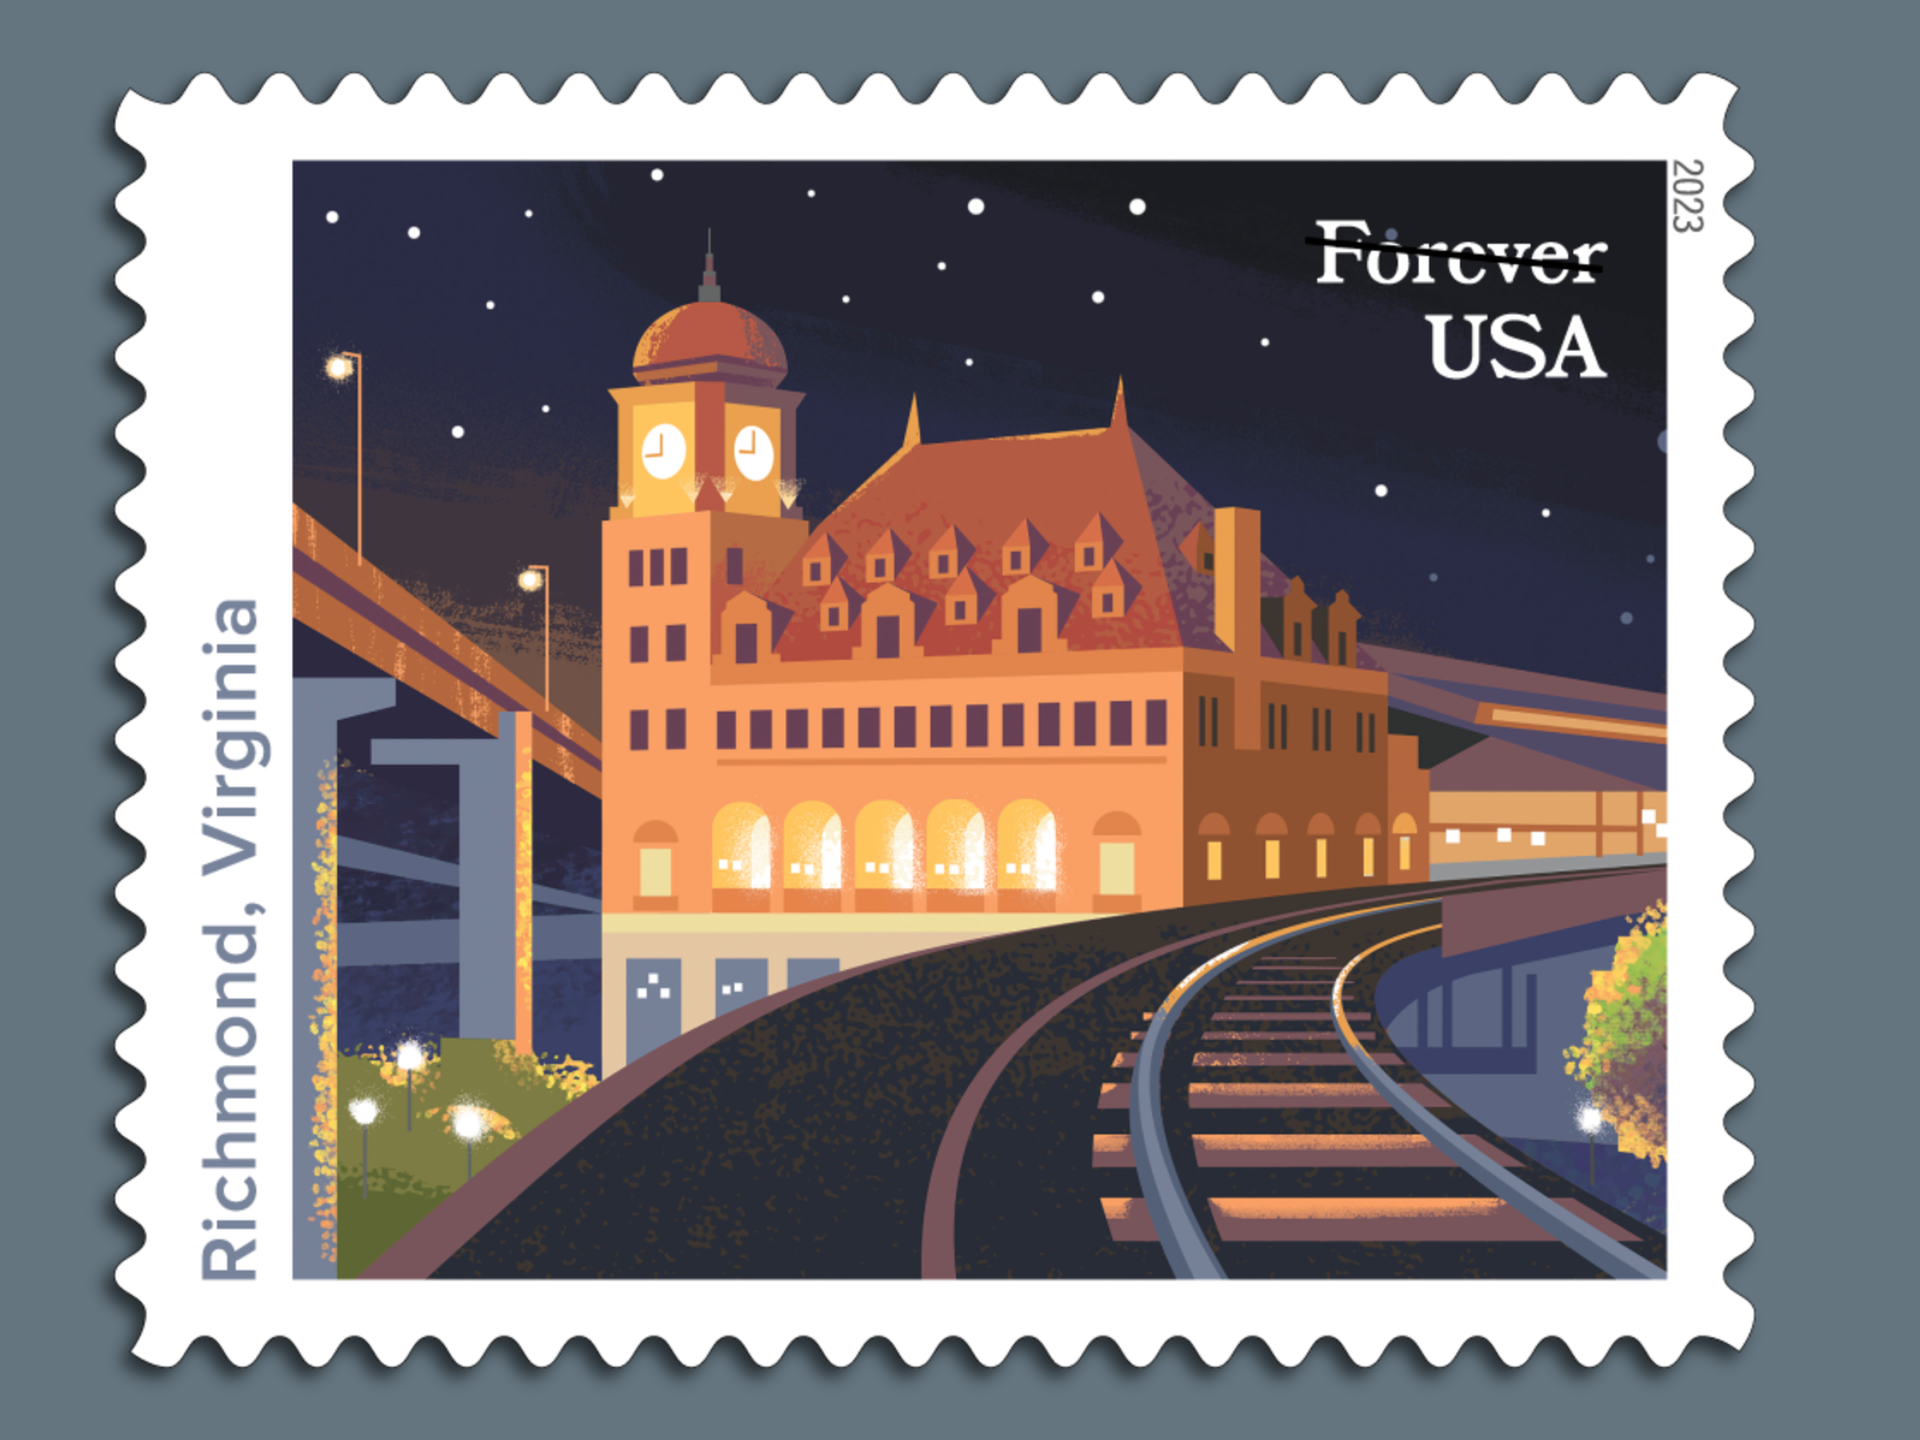 Station stamps